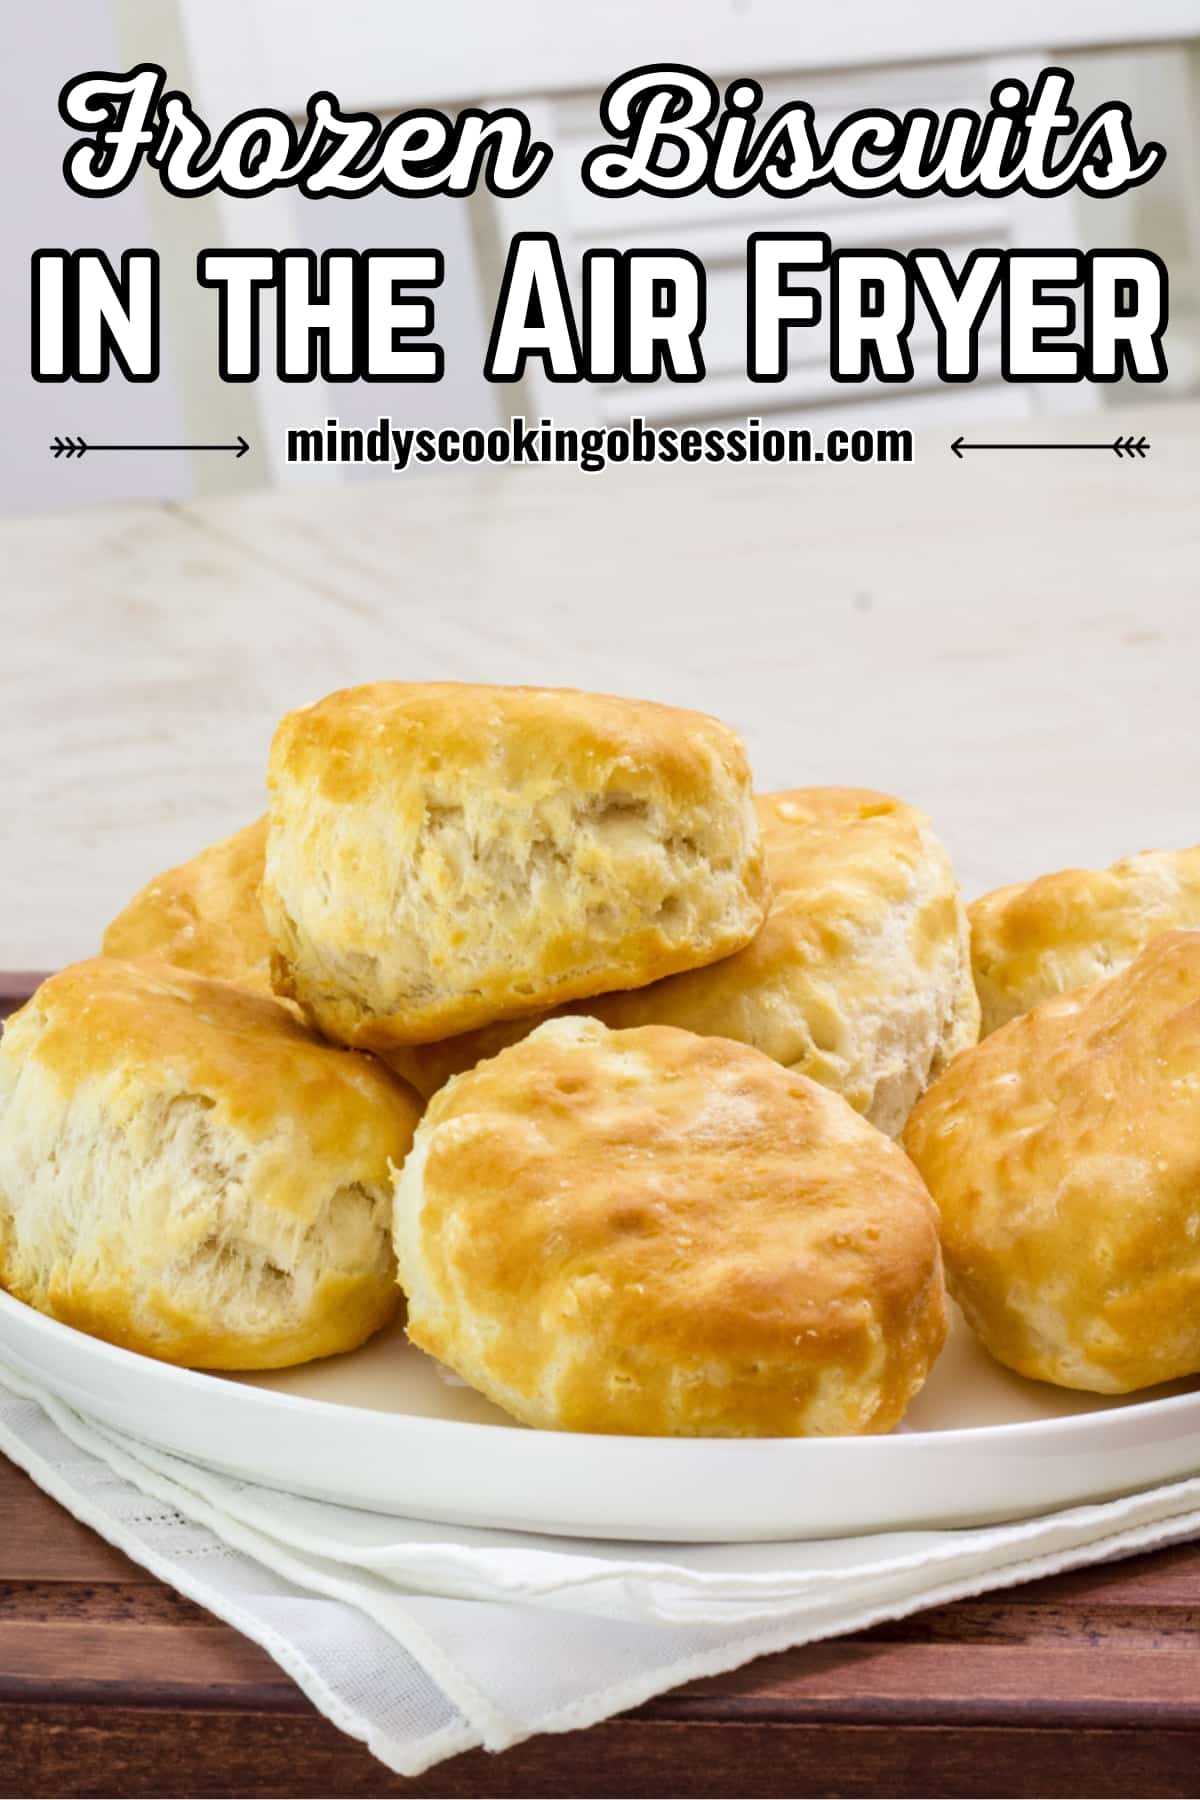 Discover the quickest and tastiest way to enjoy fluffy, golden-brown Pillsbury Grands frozen biscuits with our step-by-step guide to air frying. Crispy on the outside, soft on the inside—perfect biscuits made effortlessly! via @mindyscookingobsession